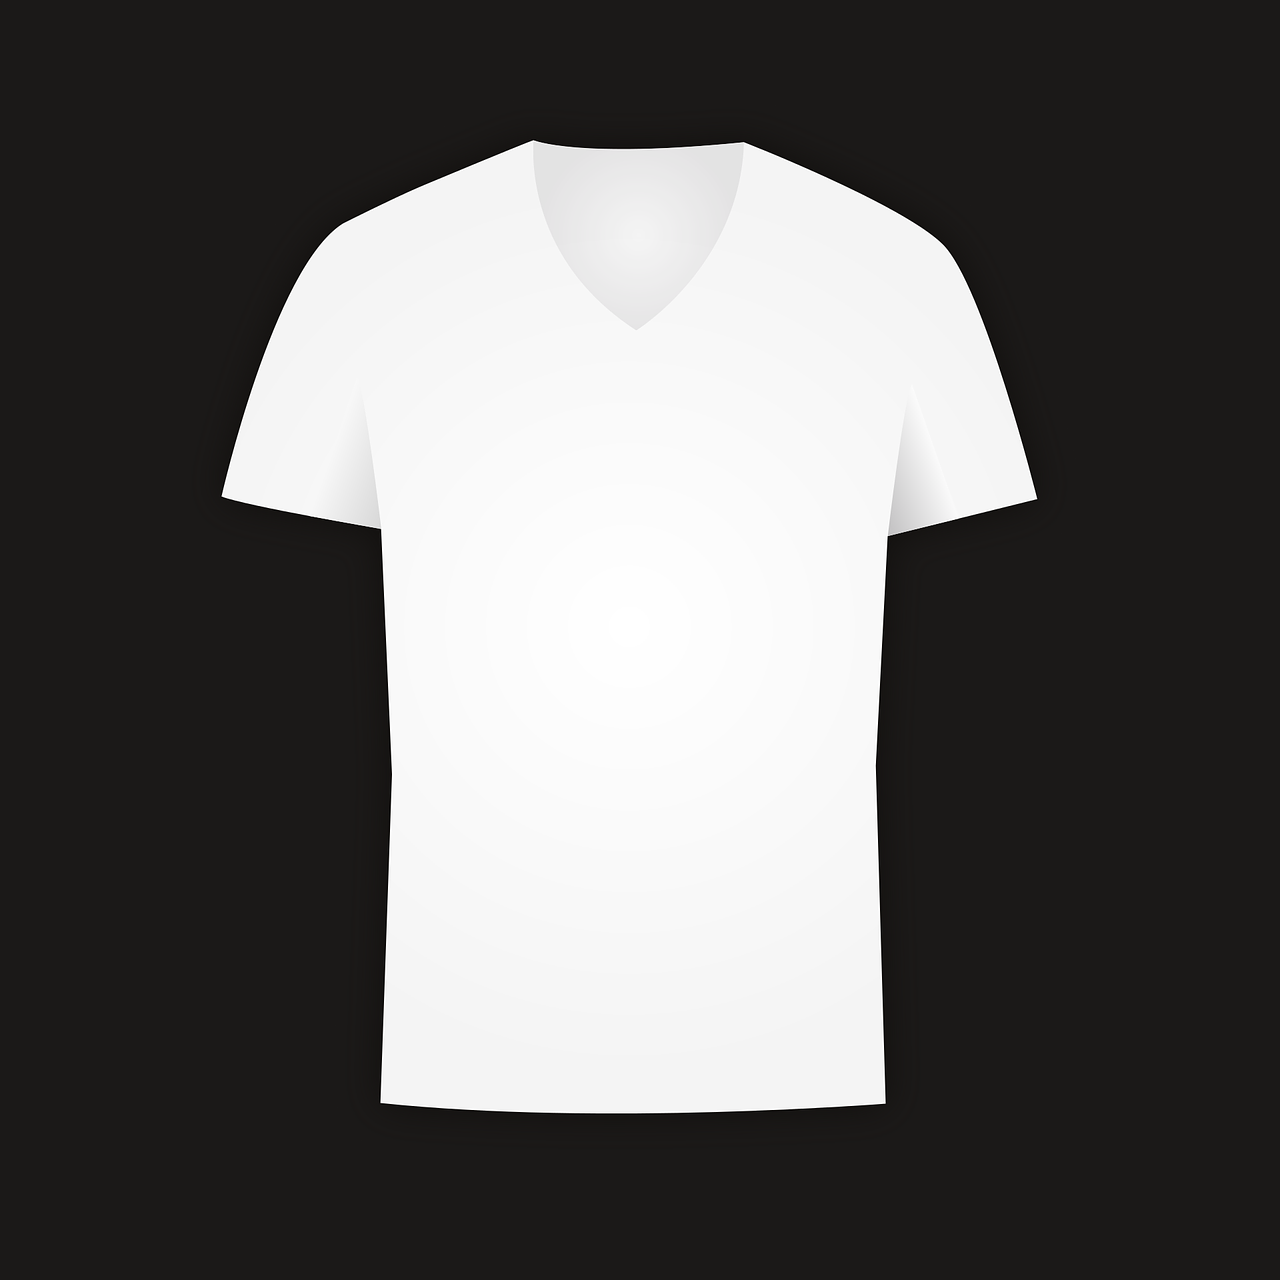 Blank t-shirt template front and back Royalty Free Vector